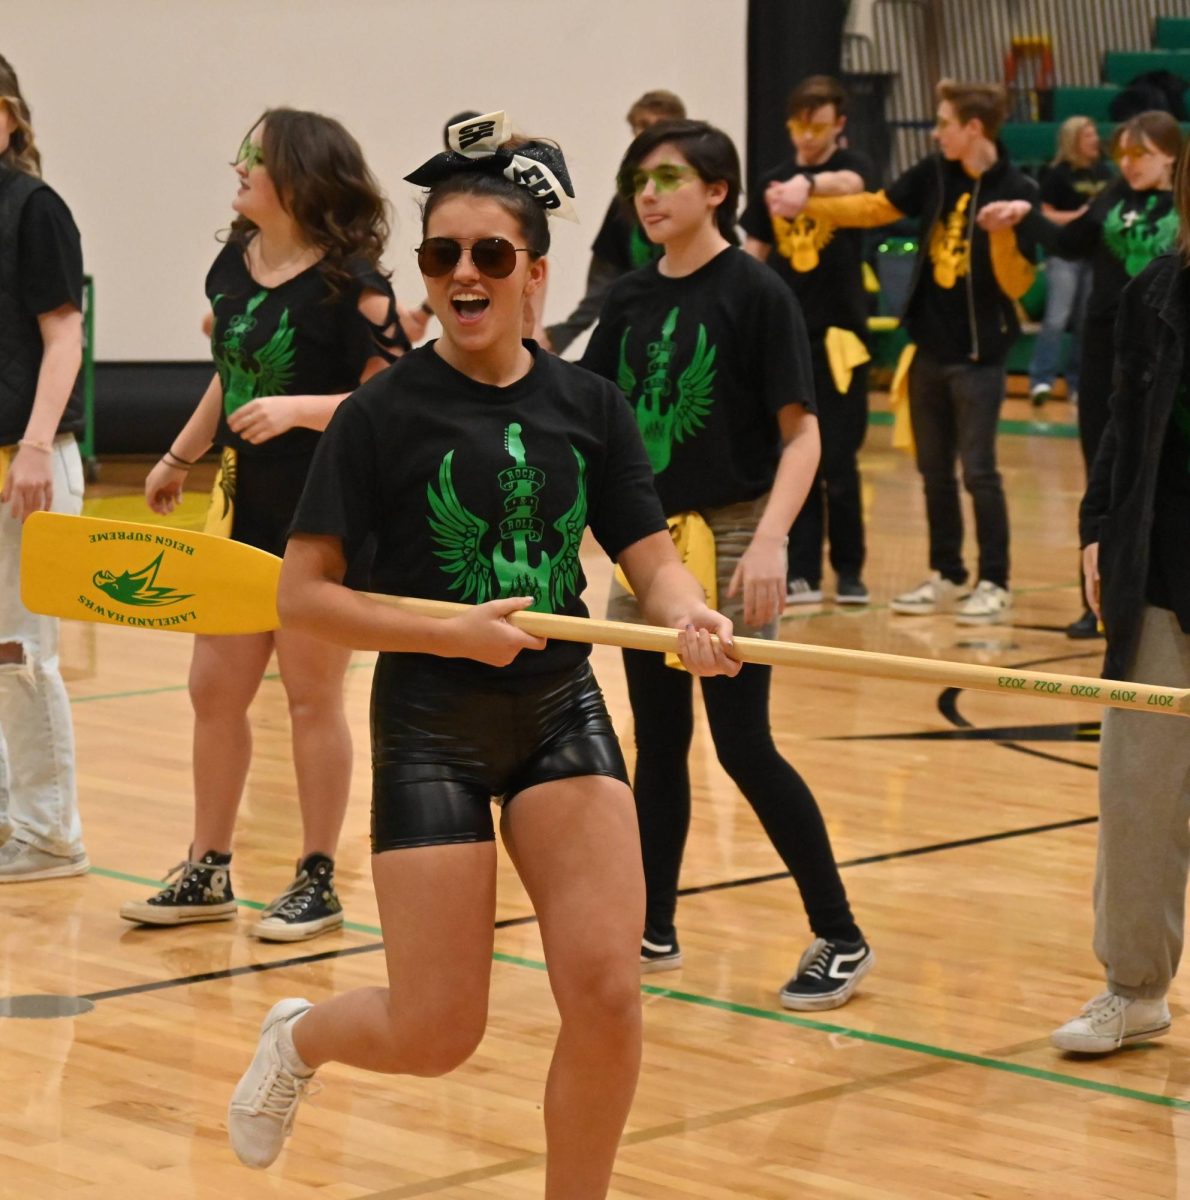 Shelby Wear runs down the court with the paddle in the lip sync. 